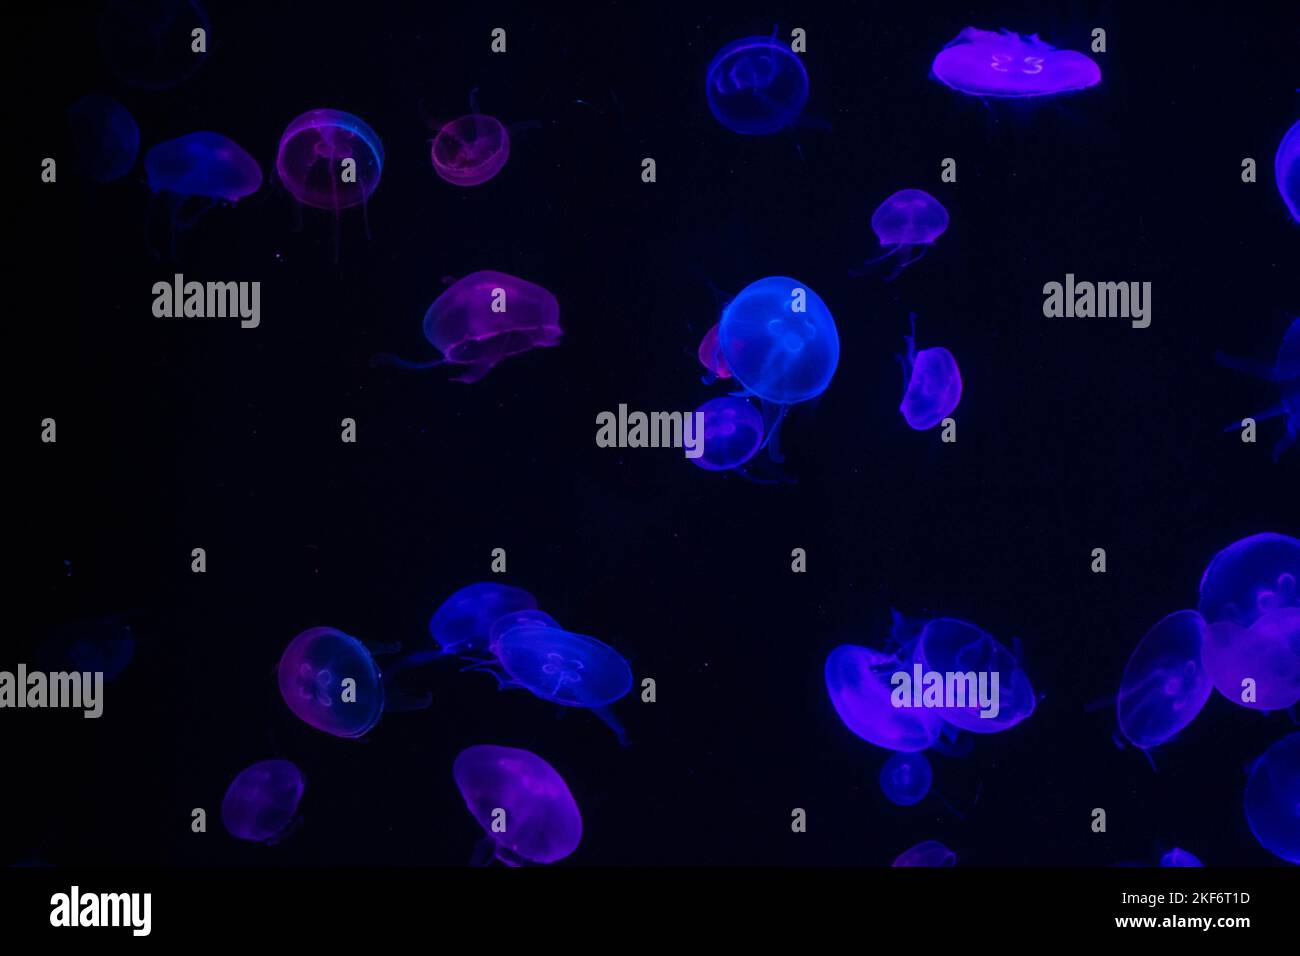 The view of Aurelia aurita fishes swimming and illuminating in the darkness Stock Photo